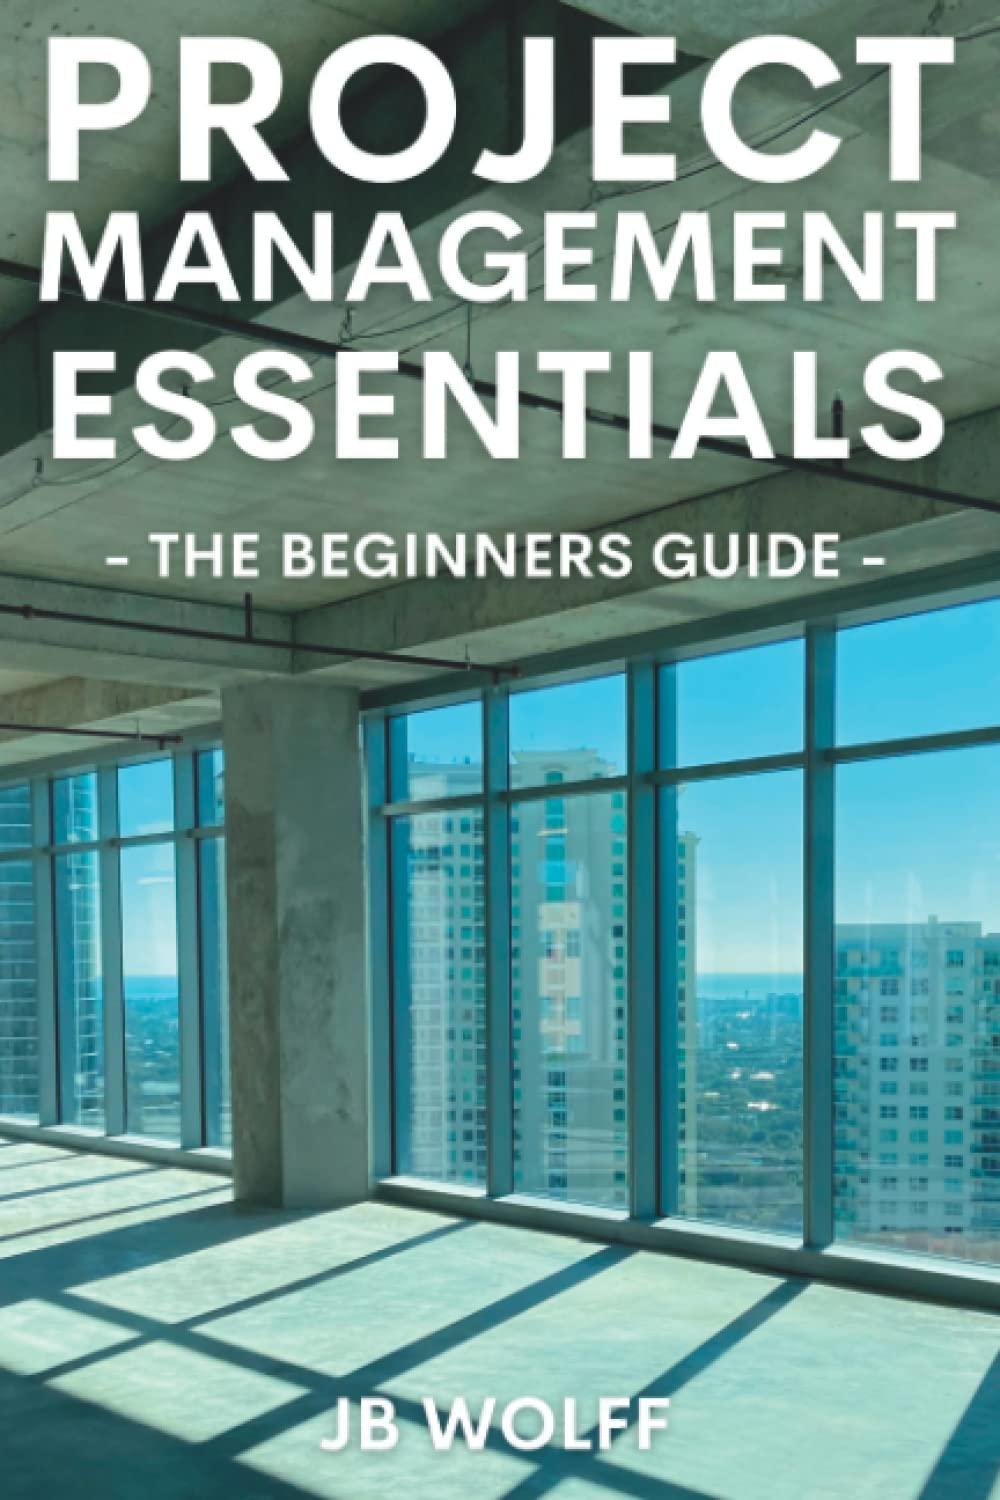 project management essentials the beginners guide 1st edition jb wolff b0bgnf9h9d, 979-8986961101